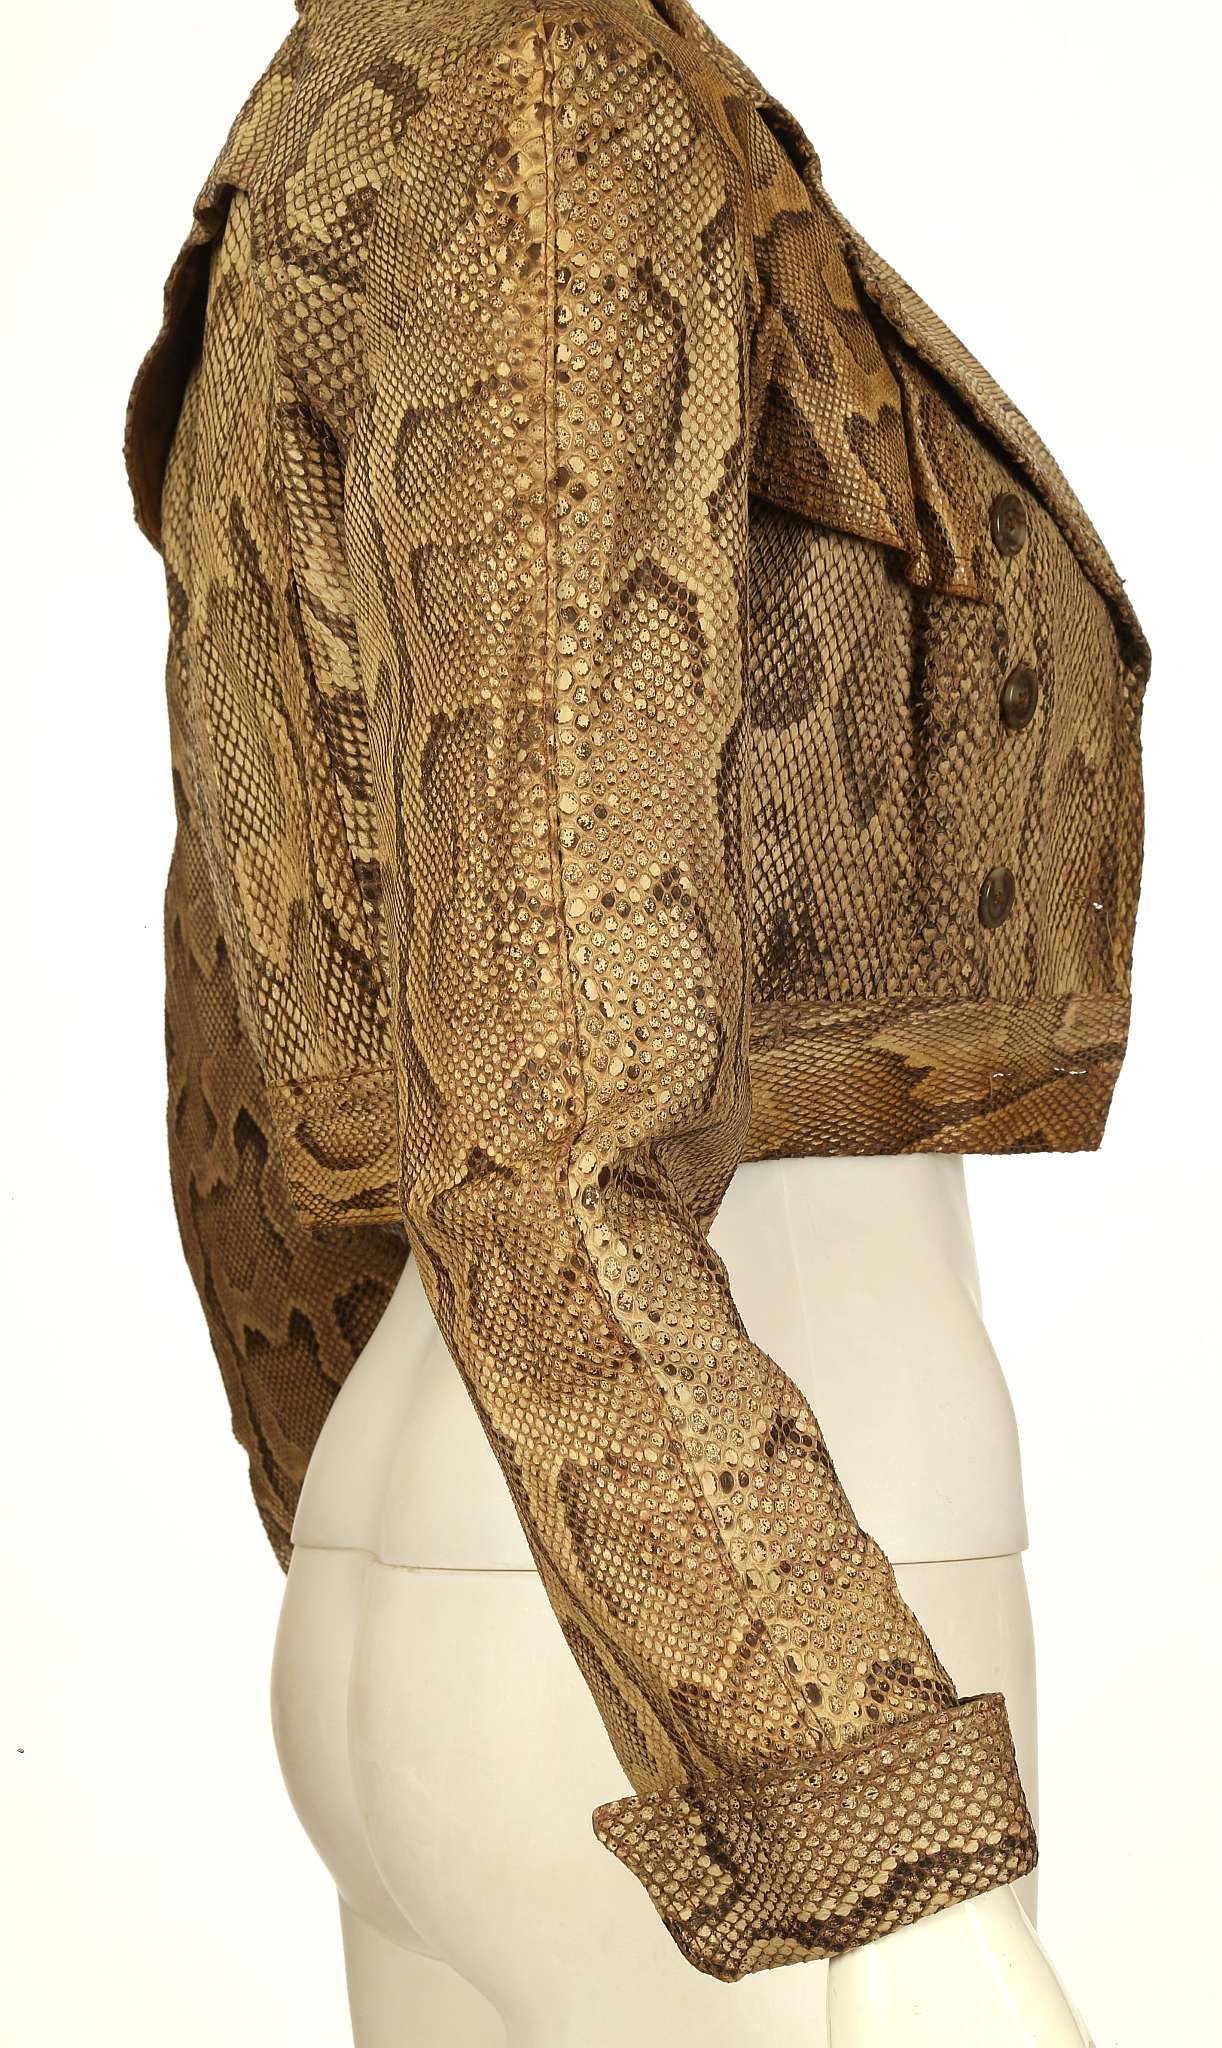 OSSIE CLARK PYTHON SKIN JACKET, late 1960s, waist length and double breasted with full lapels and - Image 7 of 8